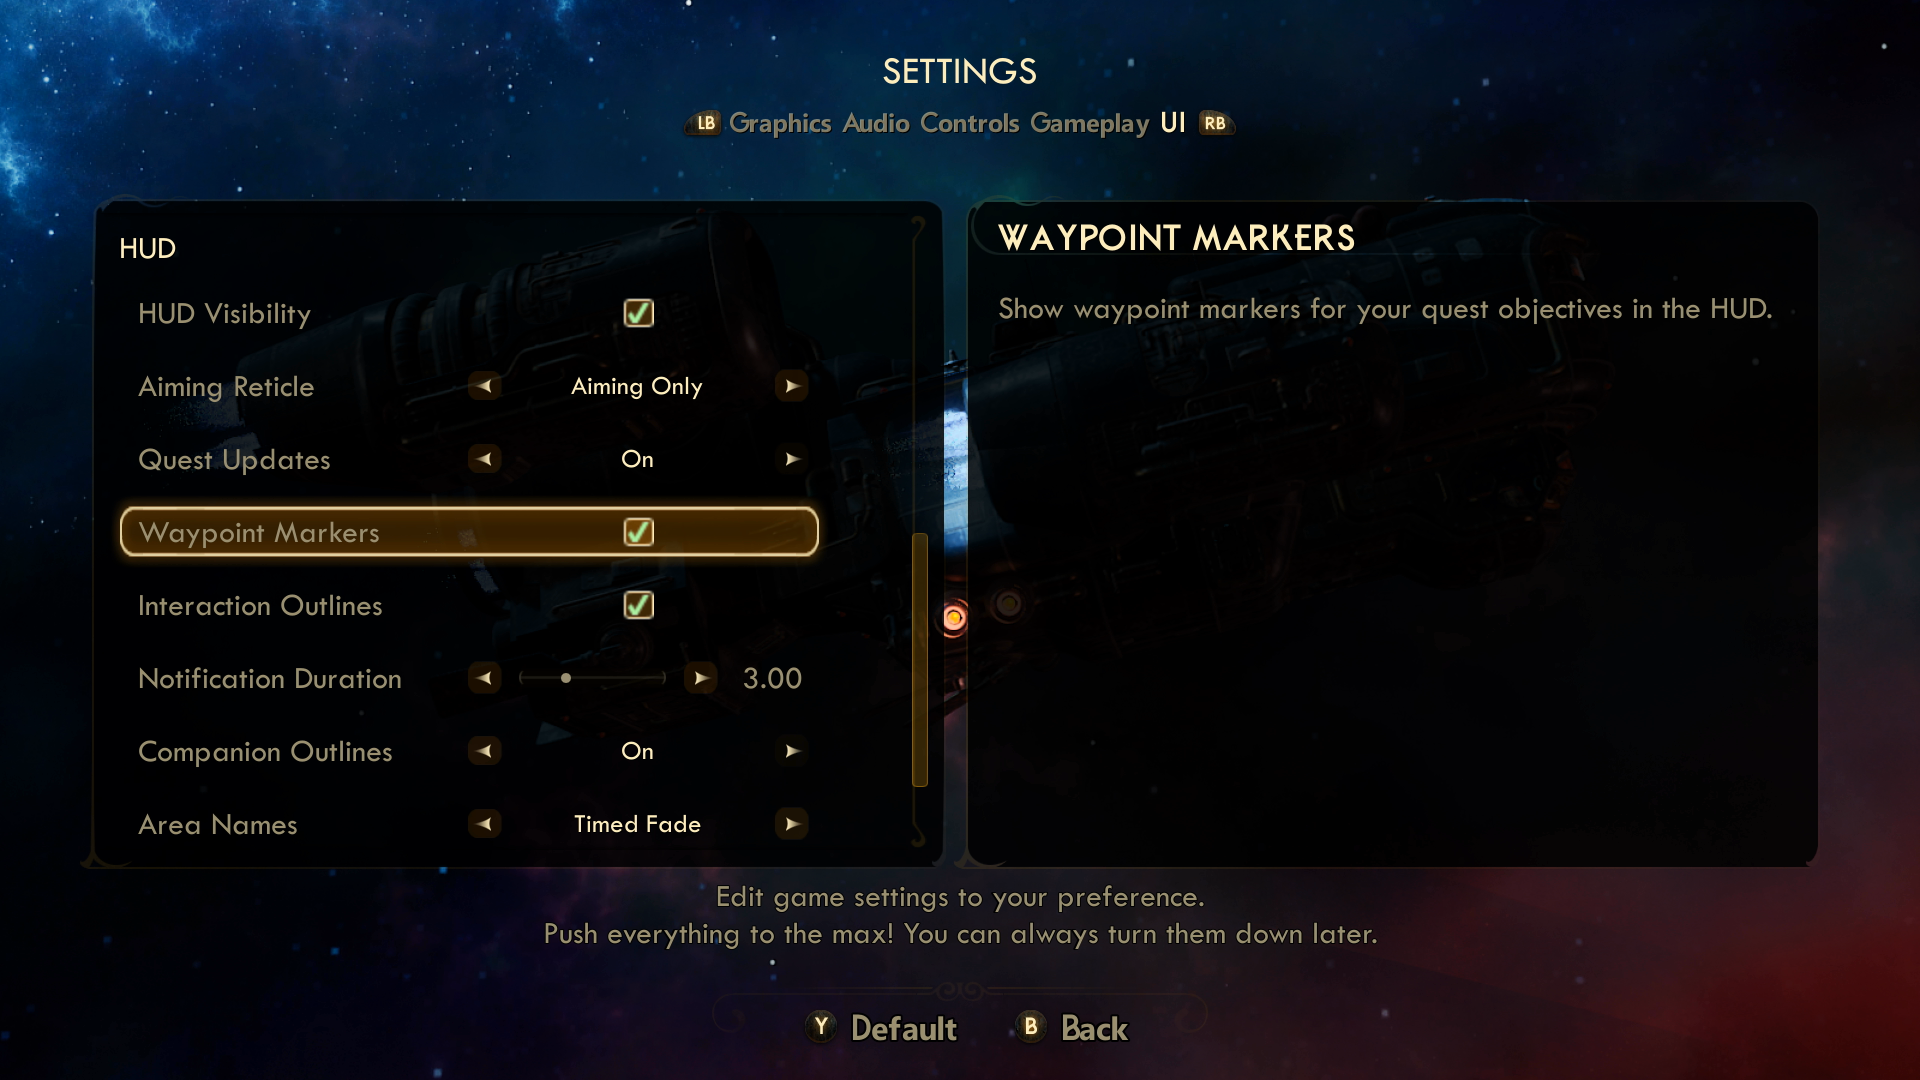 UI settings in The Outer Worlds. The player is focused on the setting waypoint markers selection, and it's toggled on. The quest updates setting is also on.